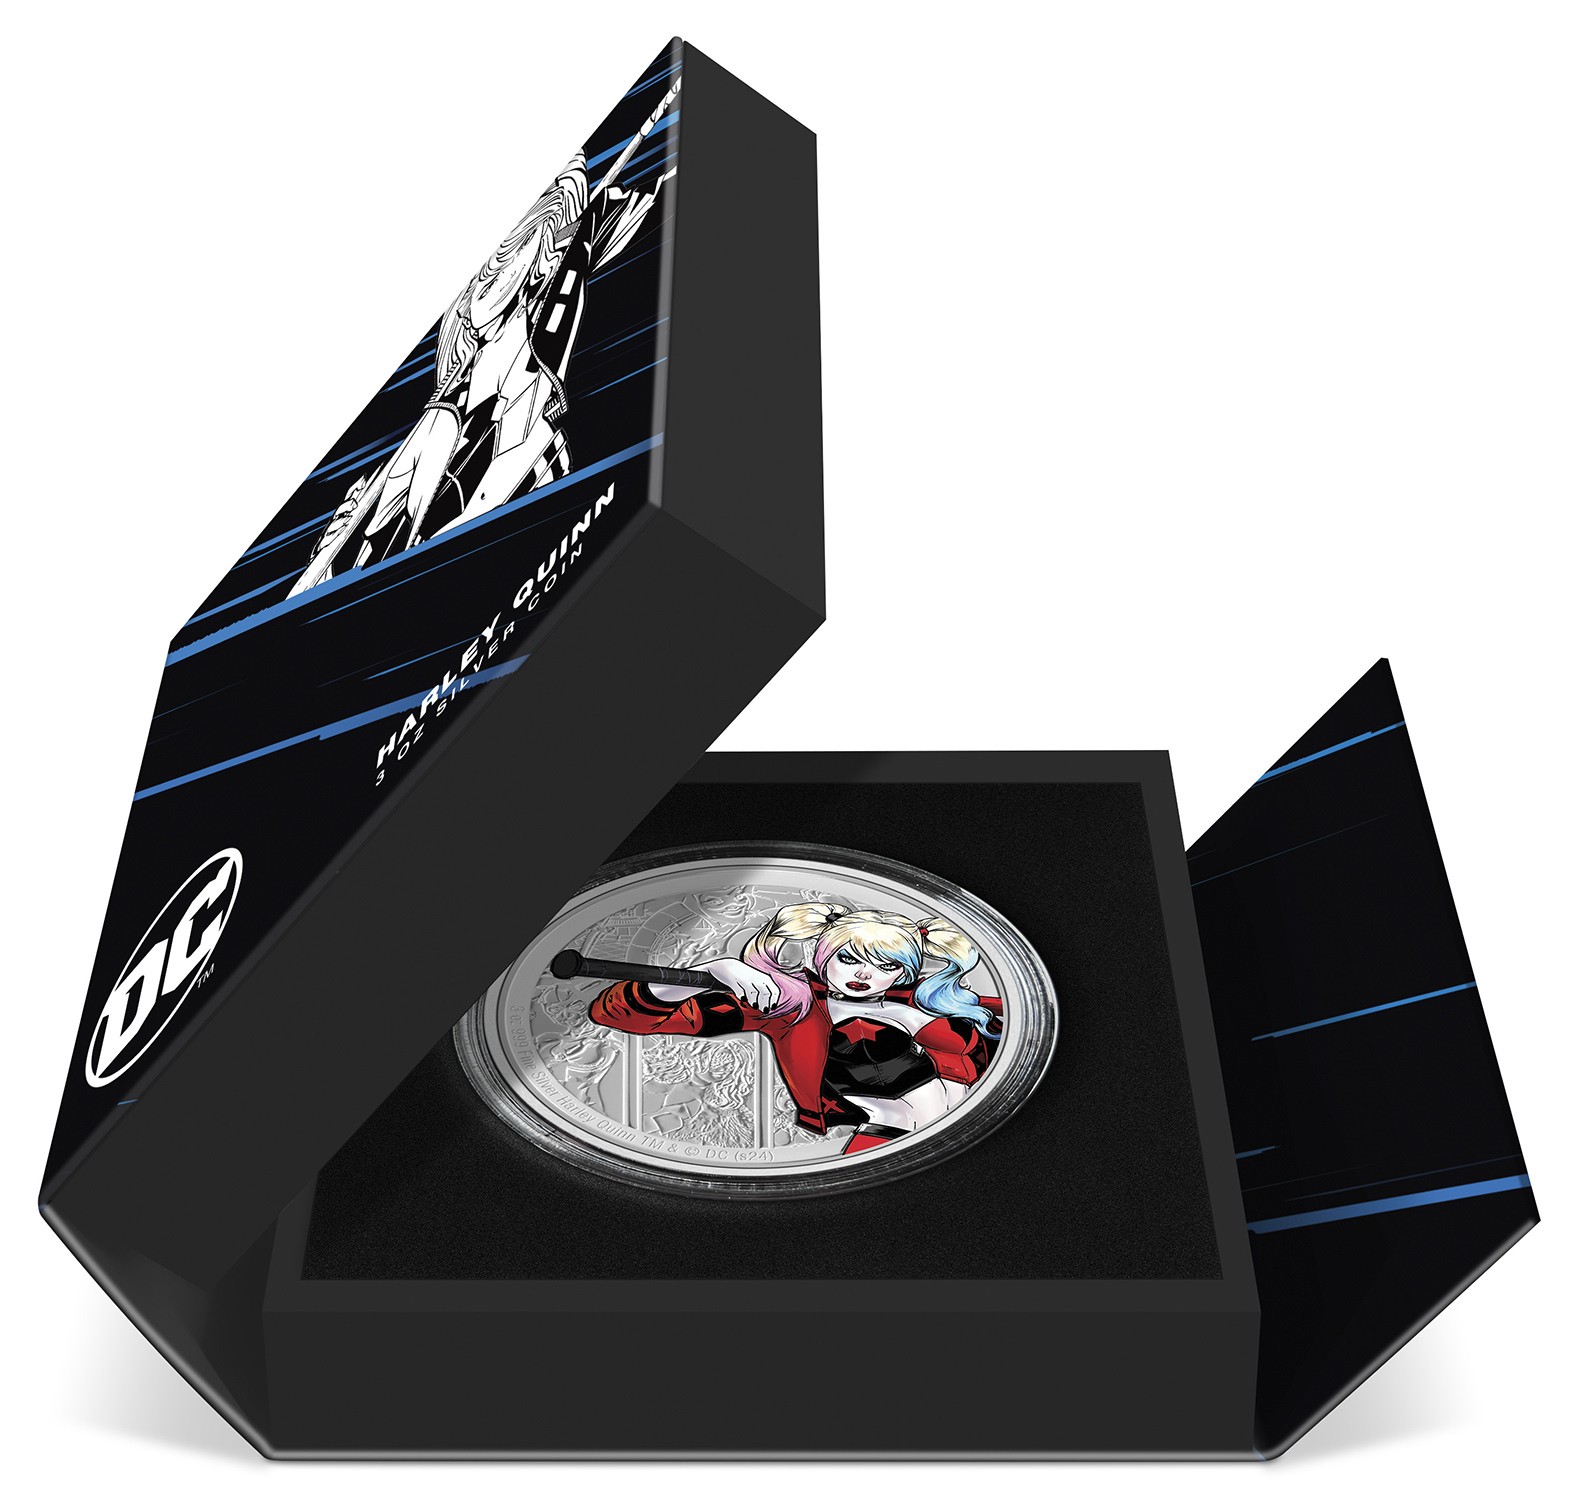 Harley Quinn 3oz Silver Coin (Prototype Shown) View 6